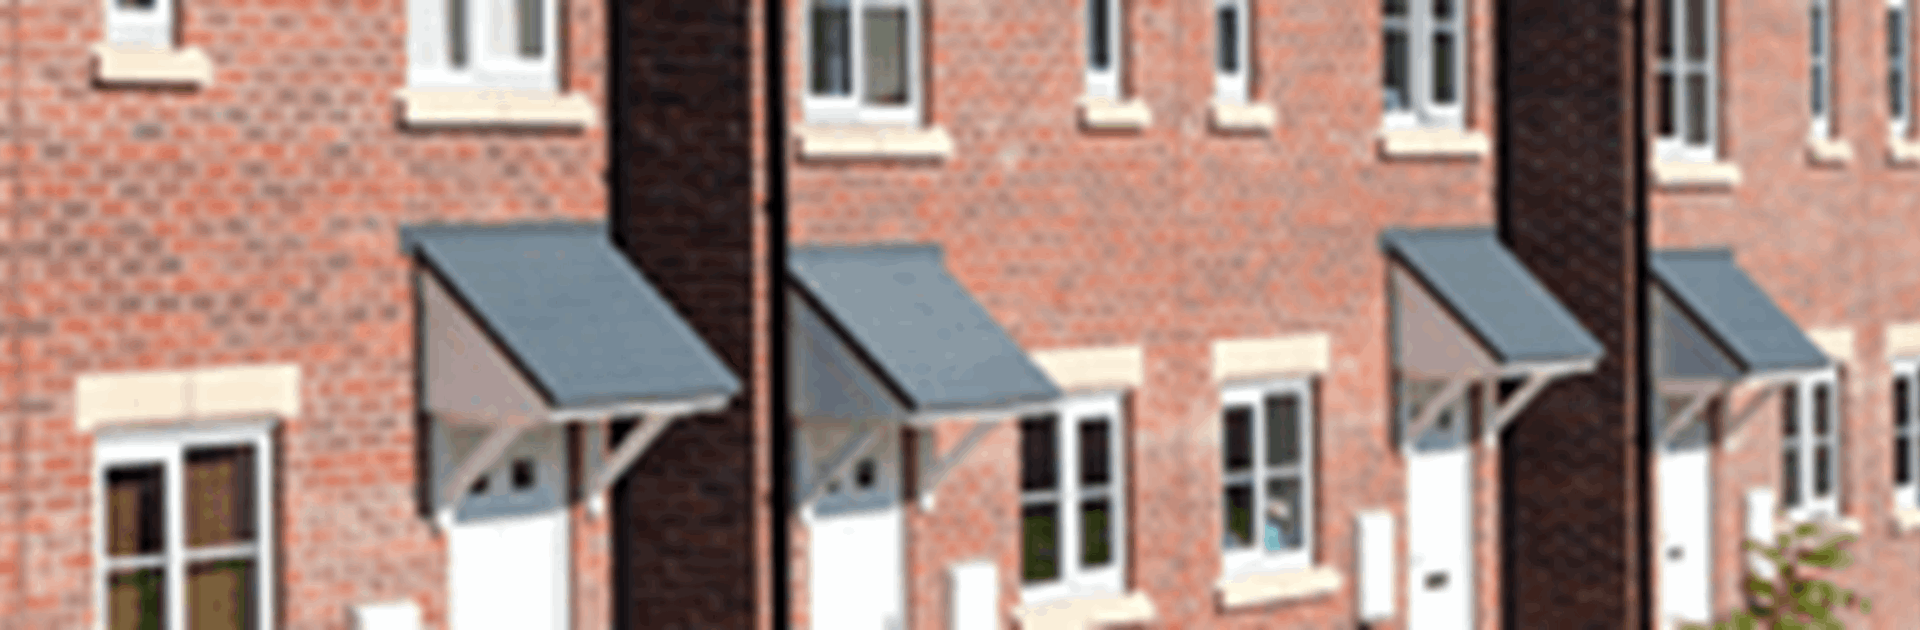 social housing ventilation systems - banner - nuaire